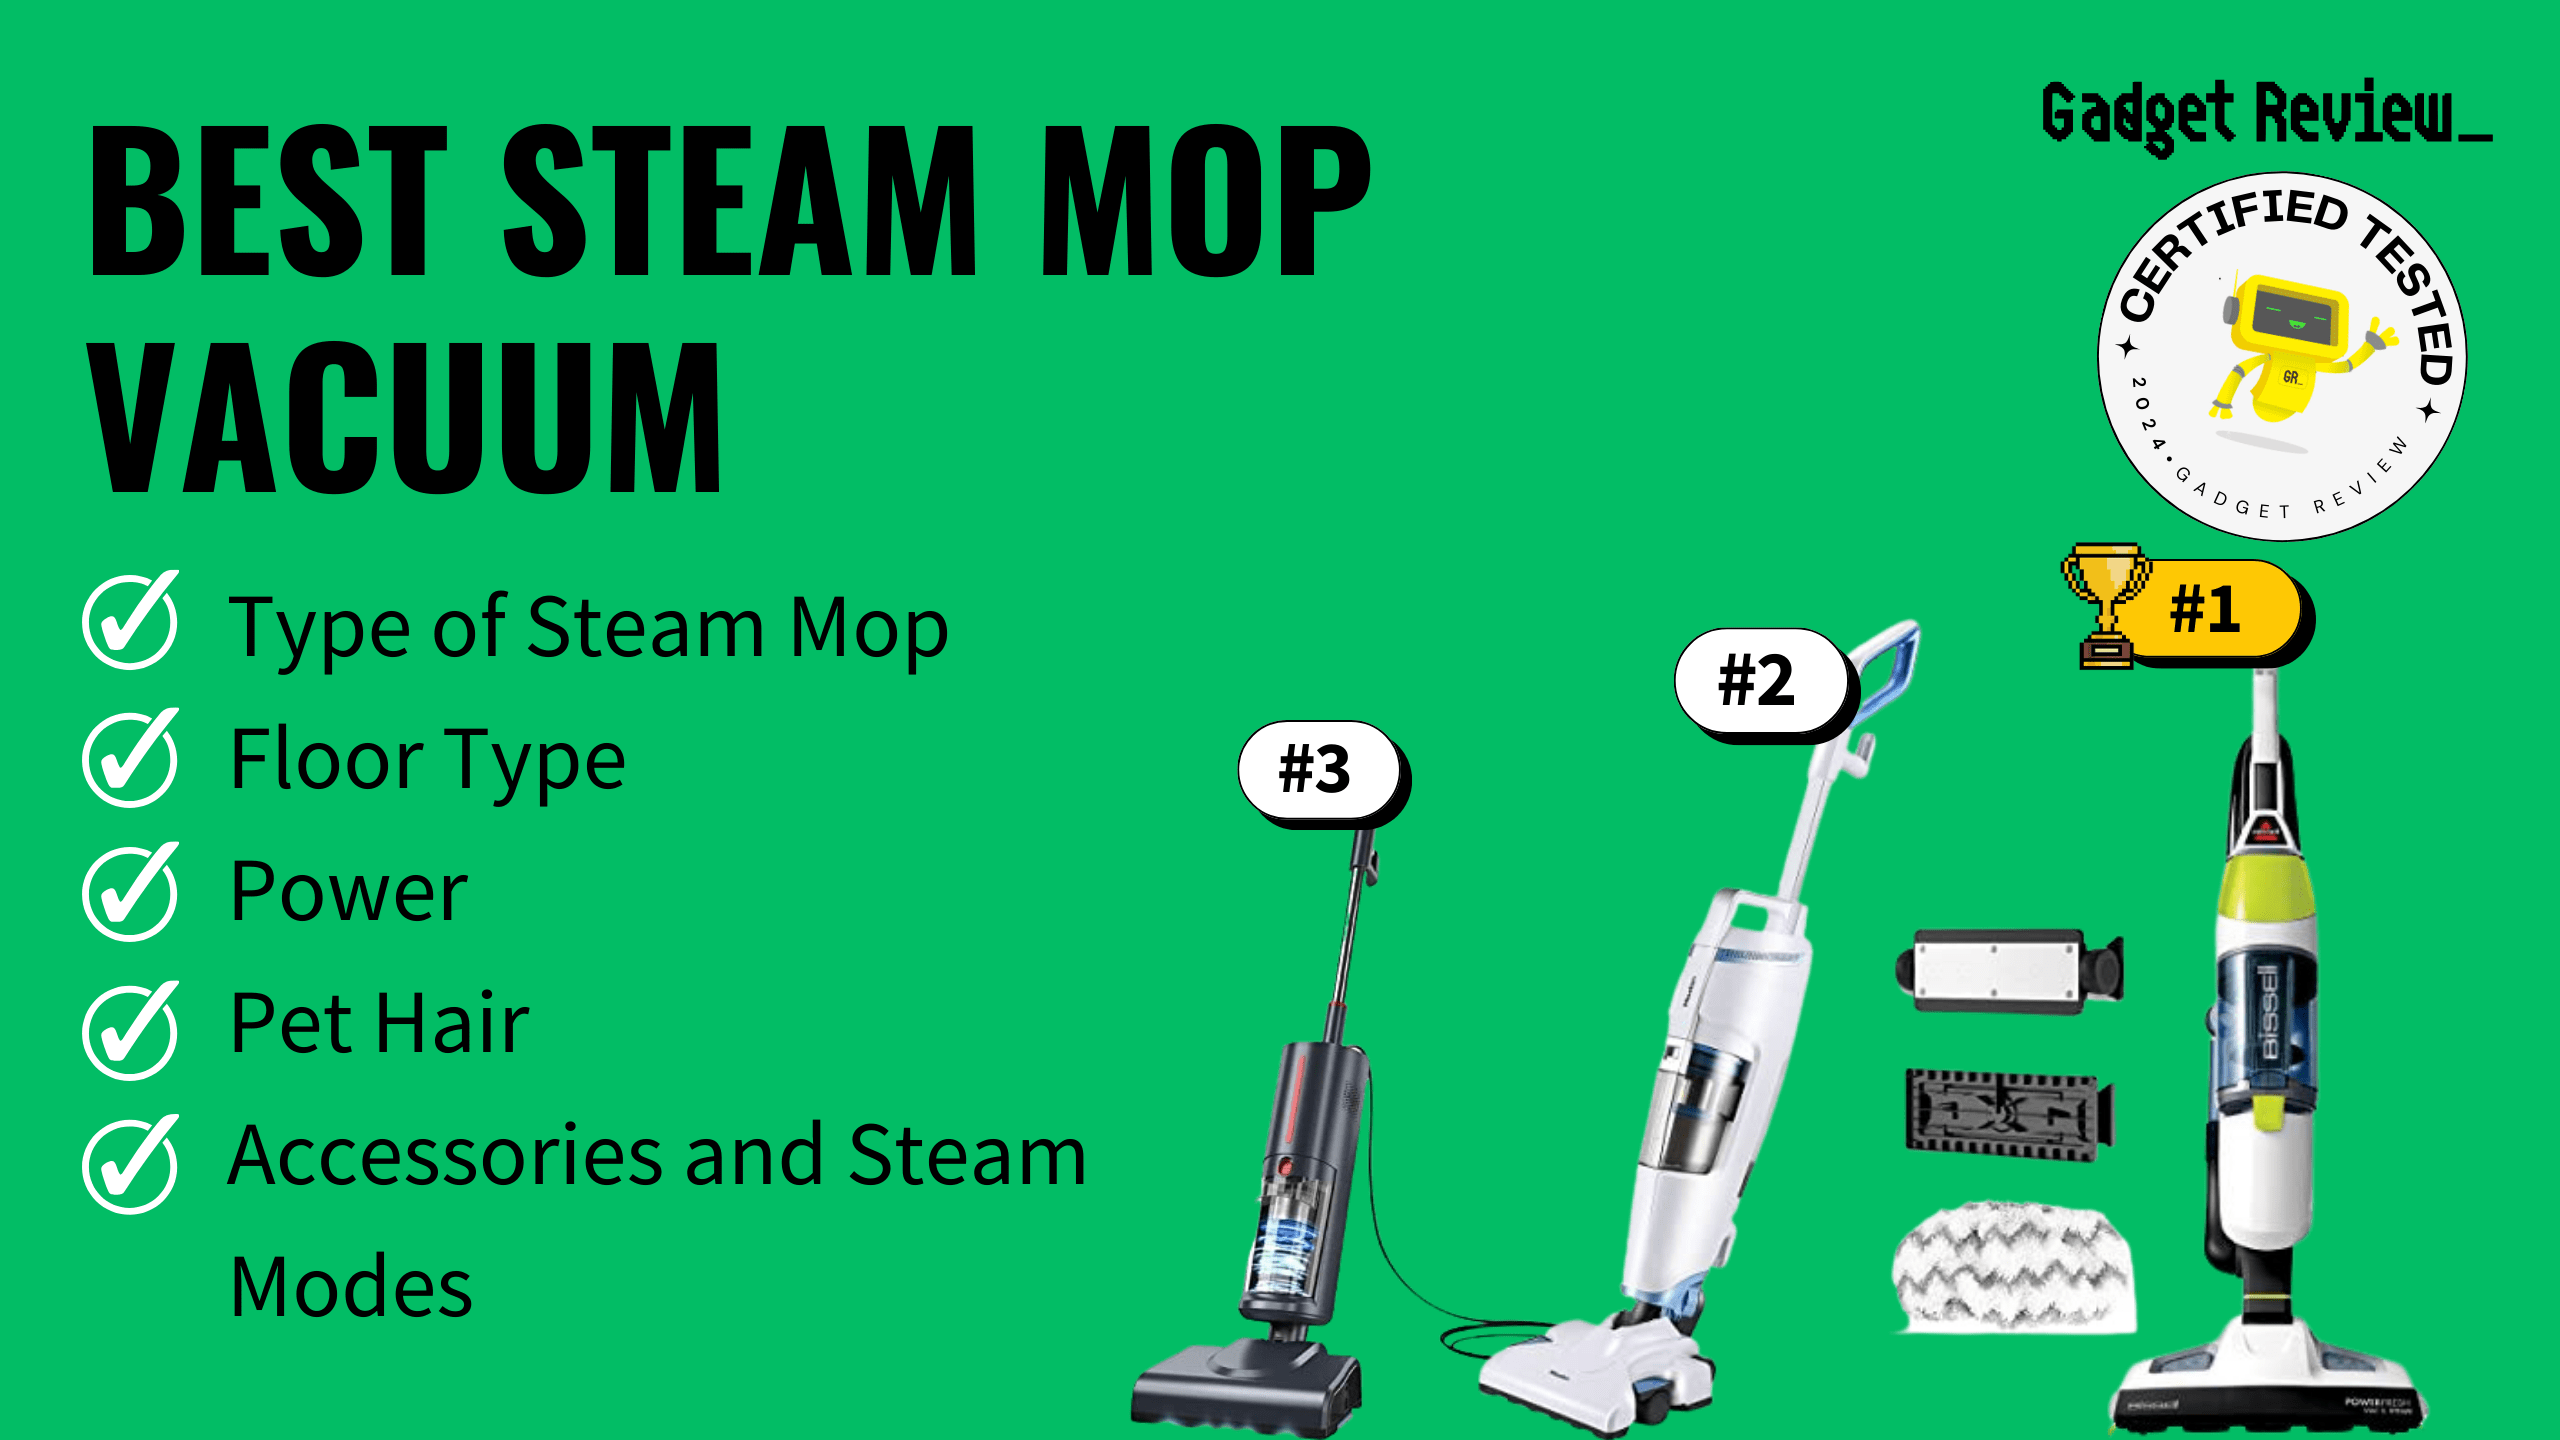 best steam mop vacuum guide that shows the top best vacuum cleaner model